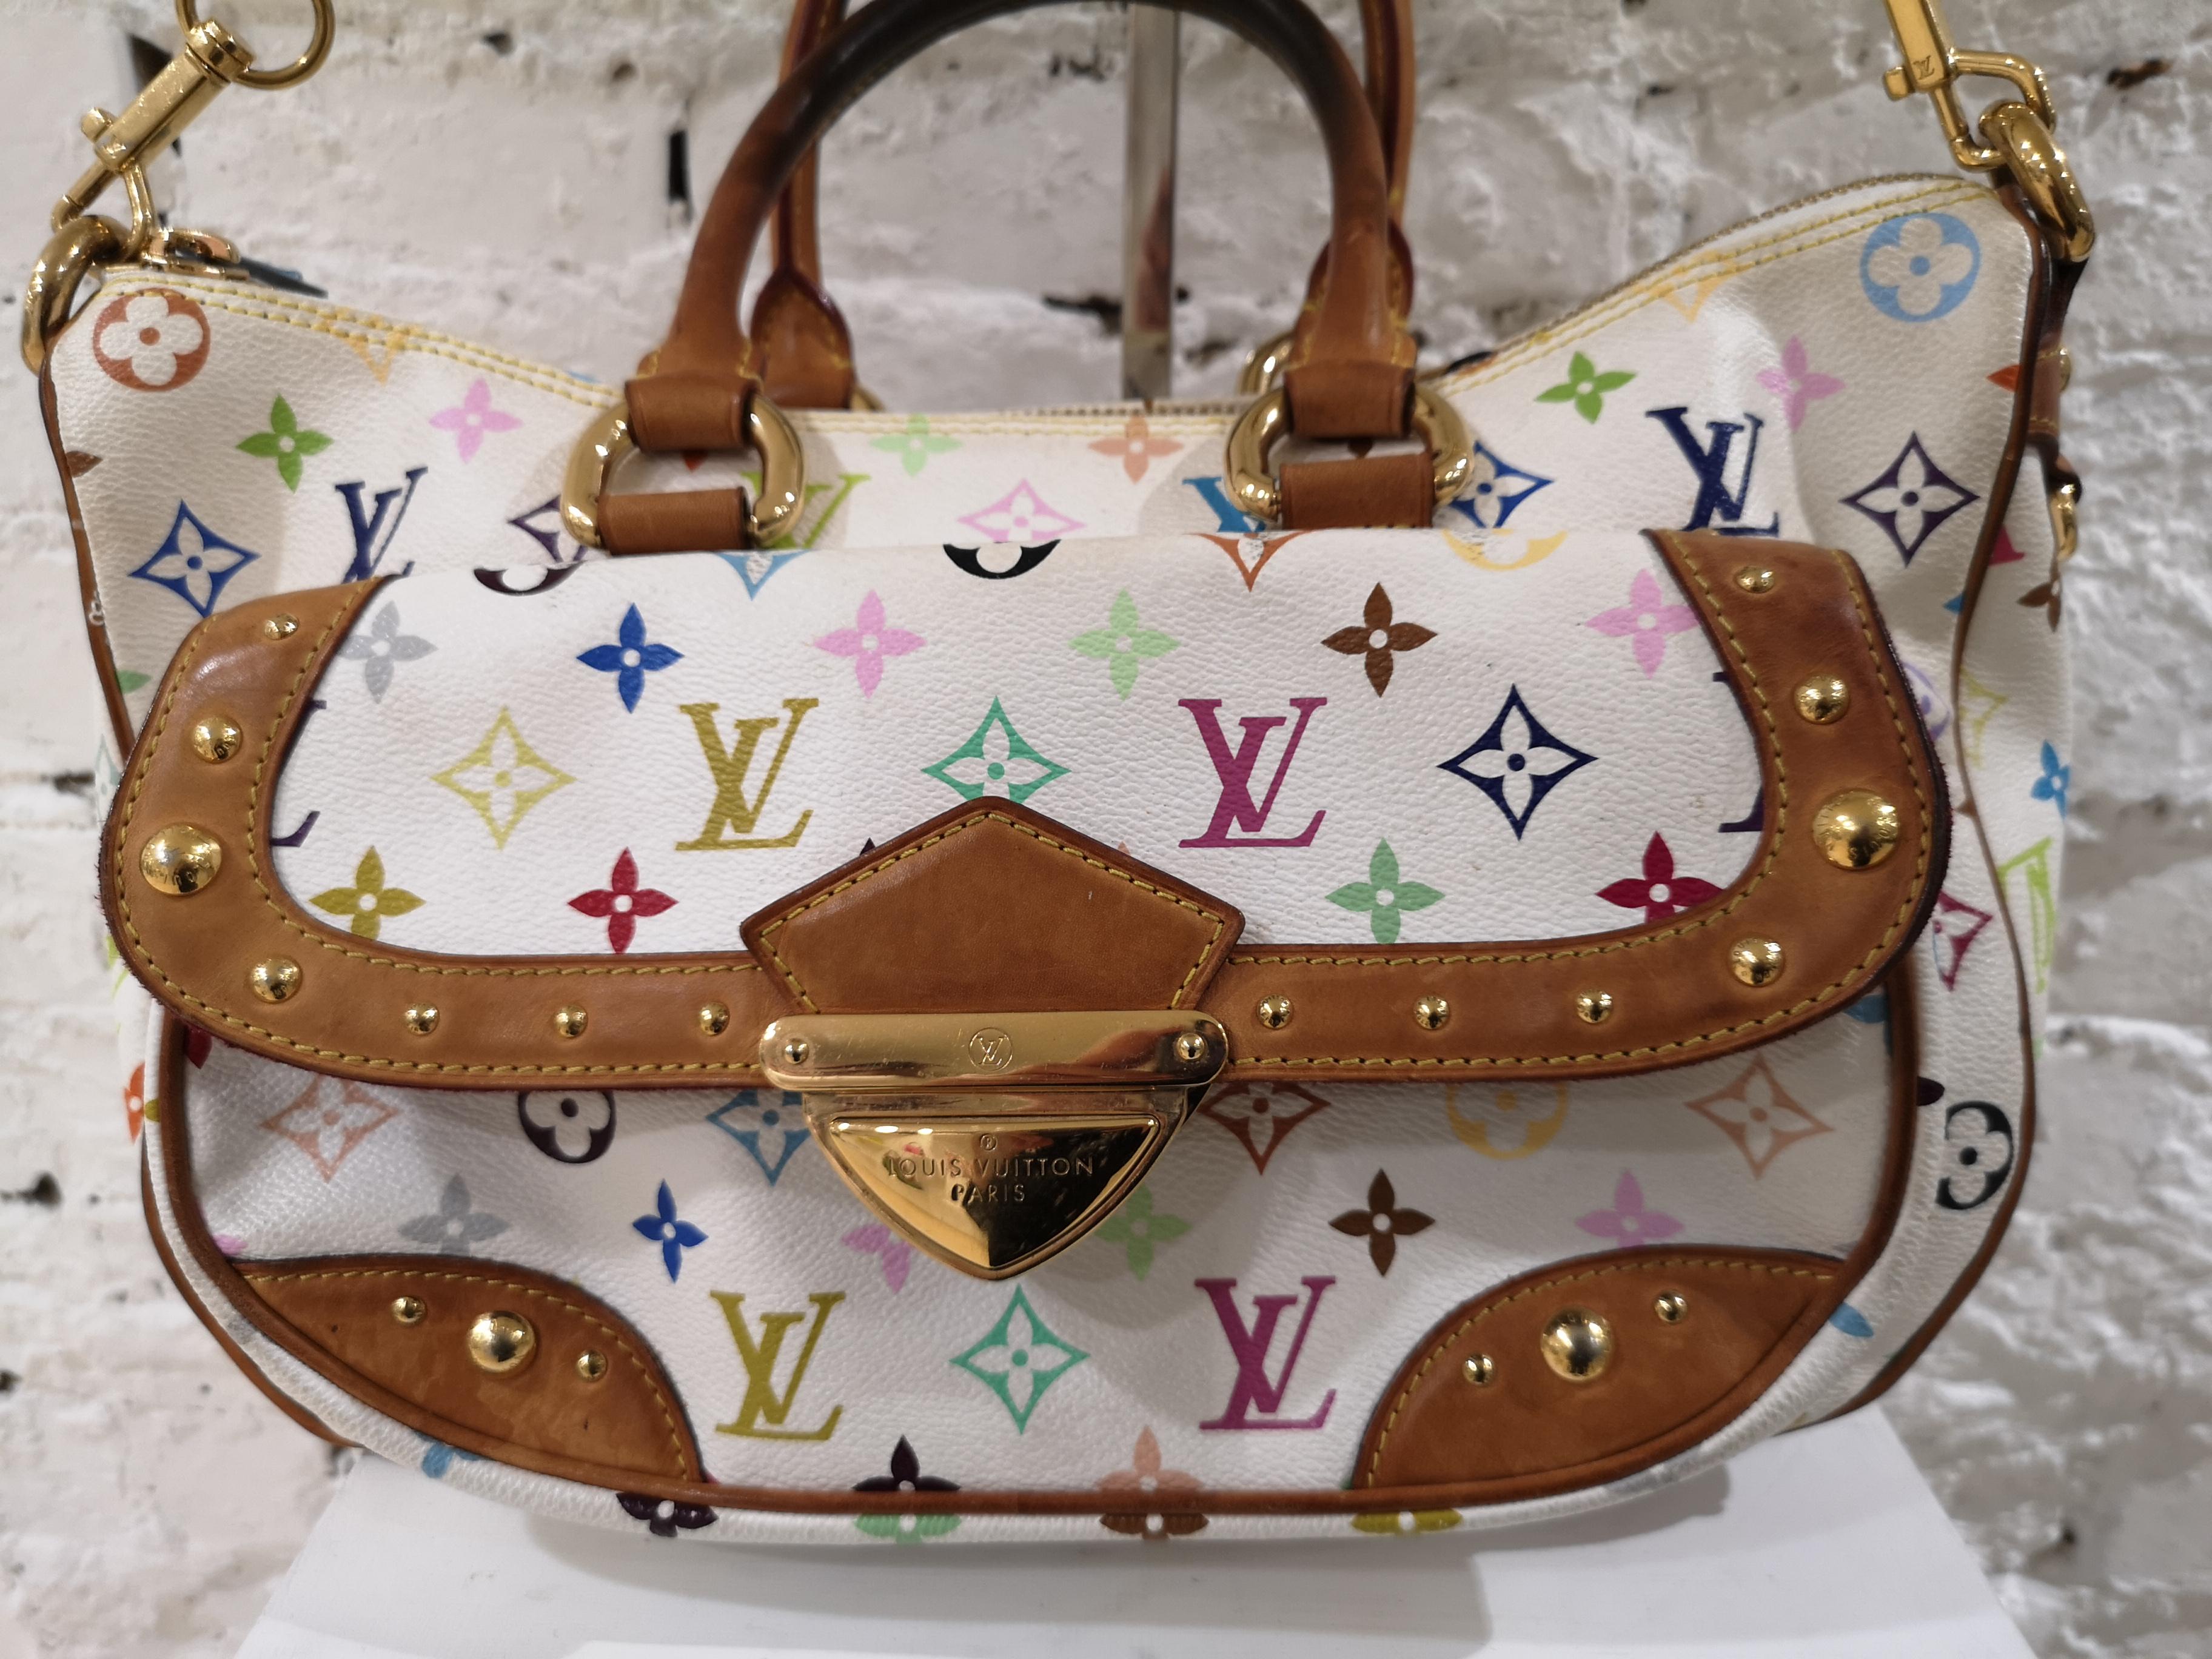 Louis Vuitton Rita White LV multi shoulder bag
Rita White Multicolor Shoulder Bag. The Louis Vuitton Rita bag is truly a rare and beautiful piece with a feminine touch. It is made with the classic white multicolored monogram canvas, natural vachetta